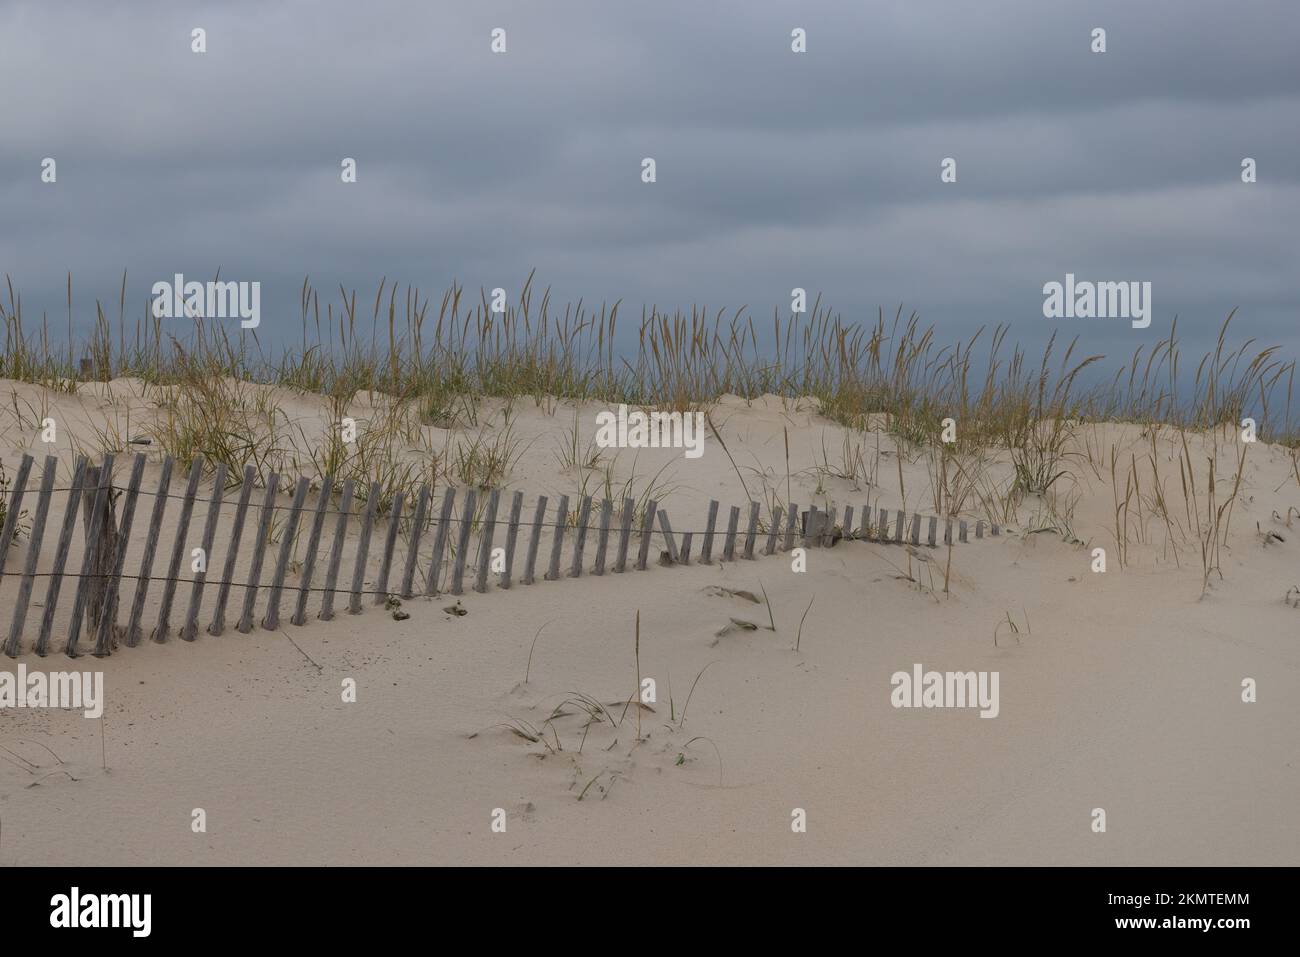 Partially buried fence in the sand dune, Cape Henlopen State Park, Delaware Stock Photo